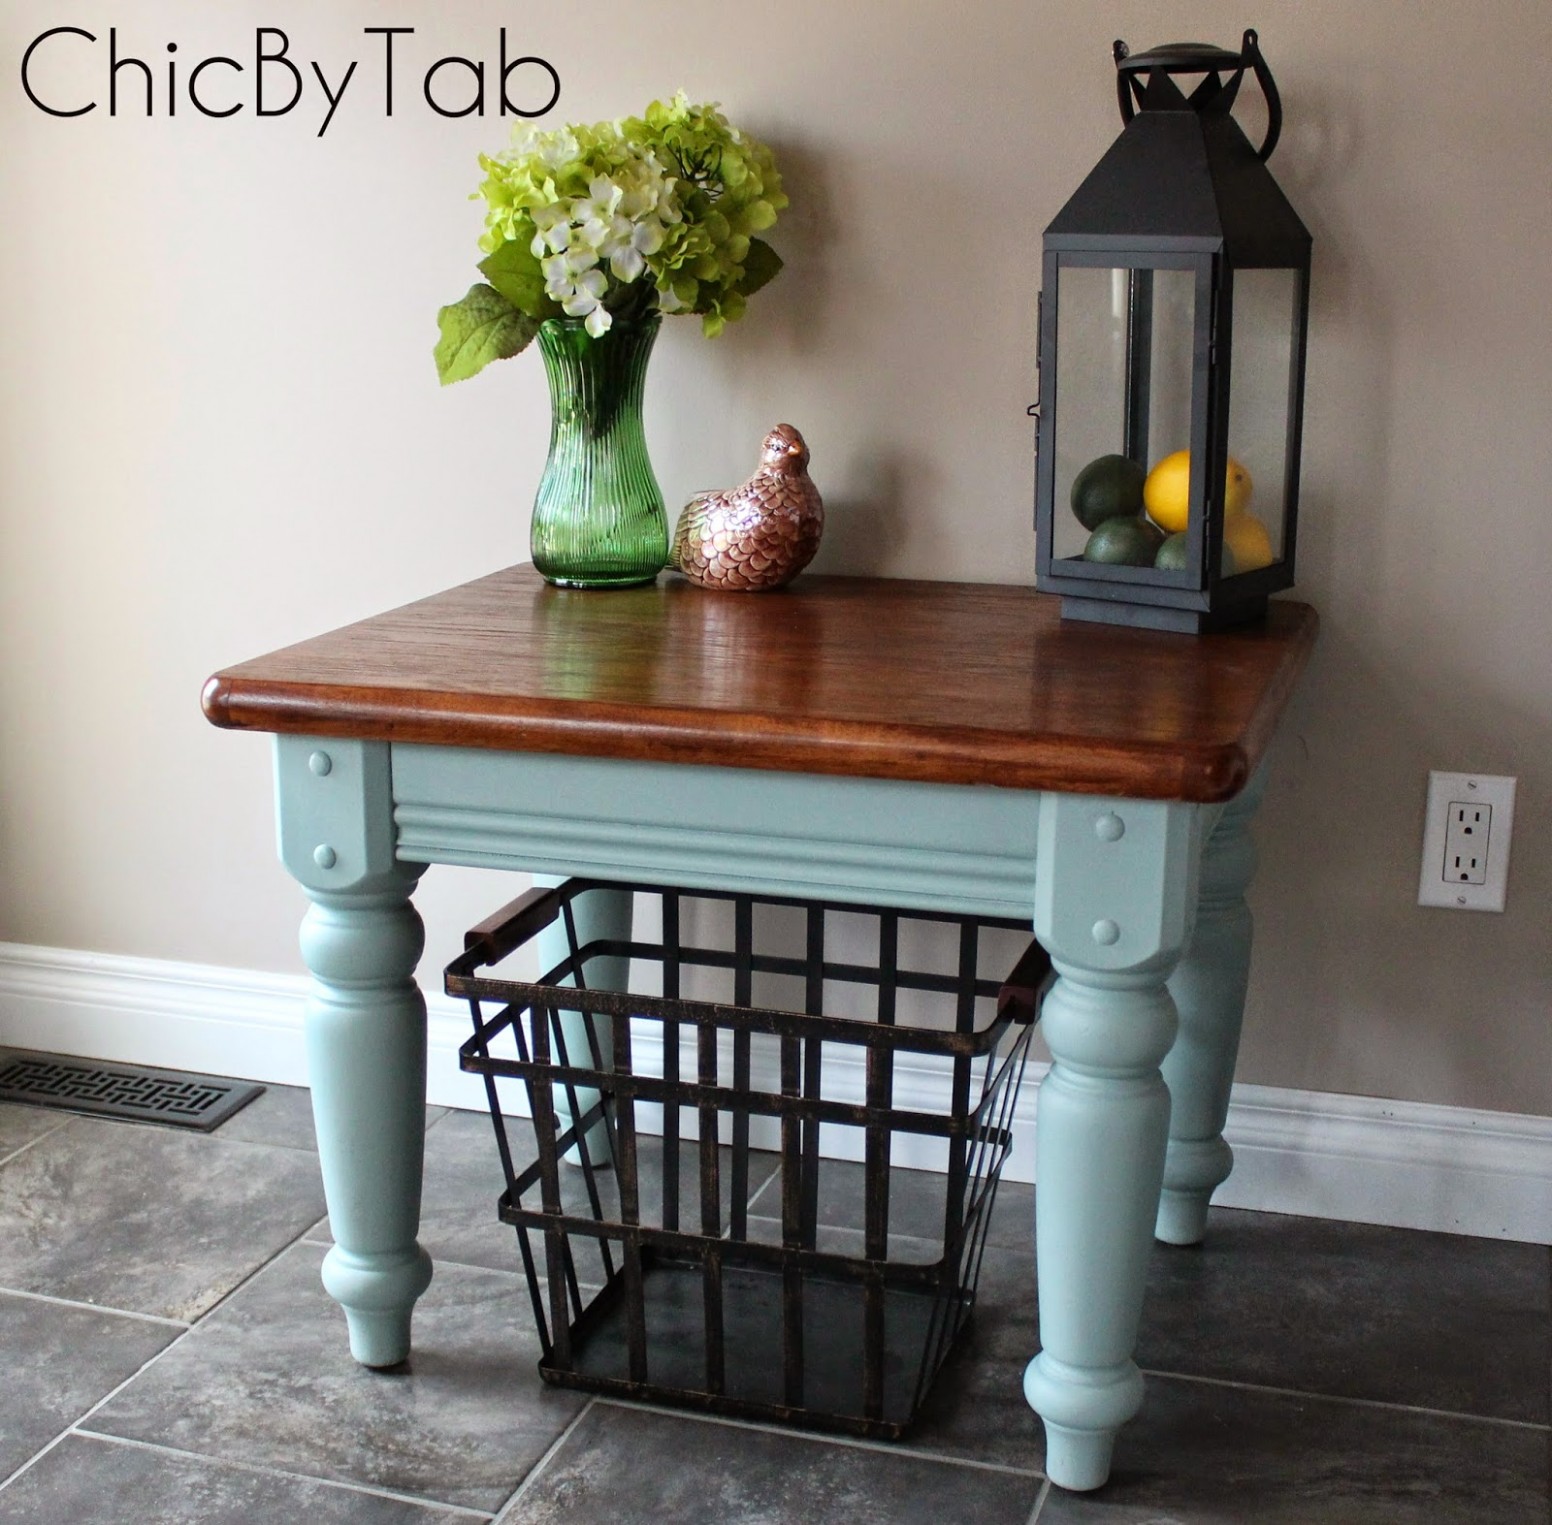 Chicbytab: Coffee Table Make Over #2 How To Chalk Paint Wood Table